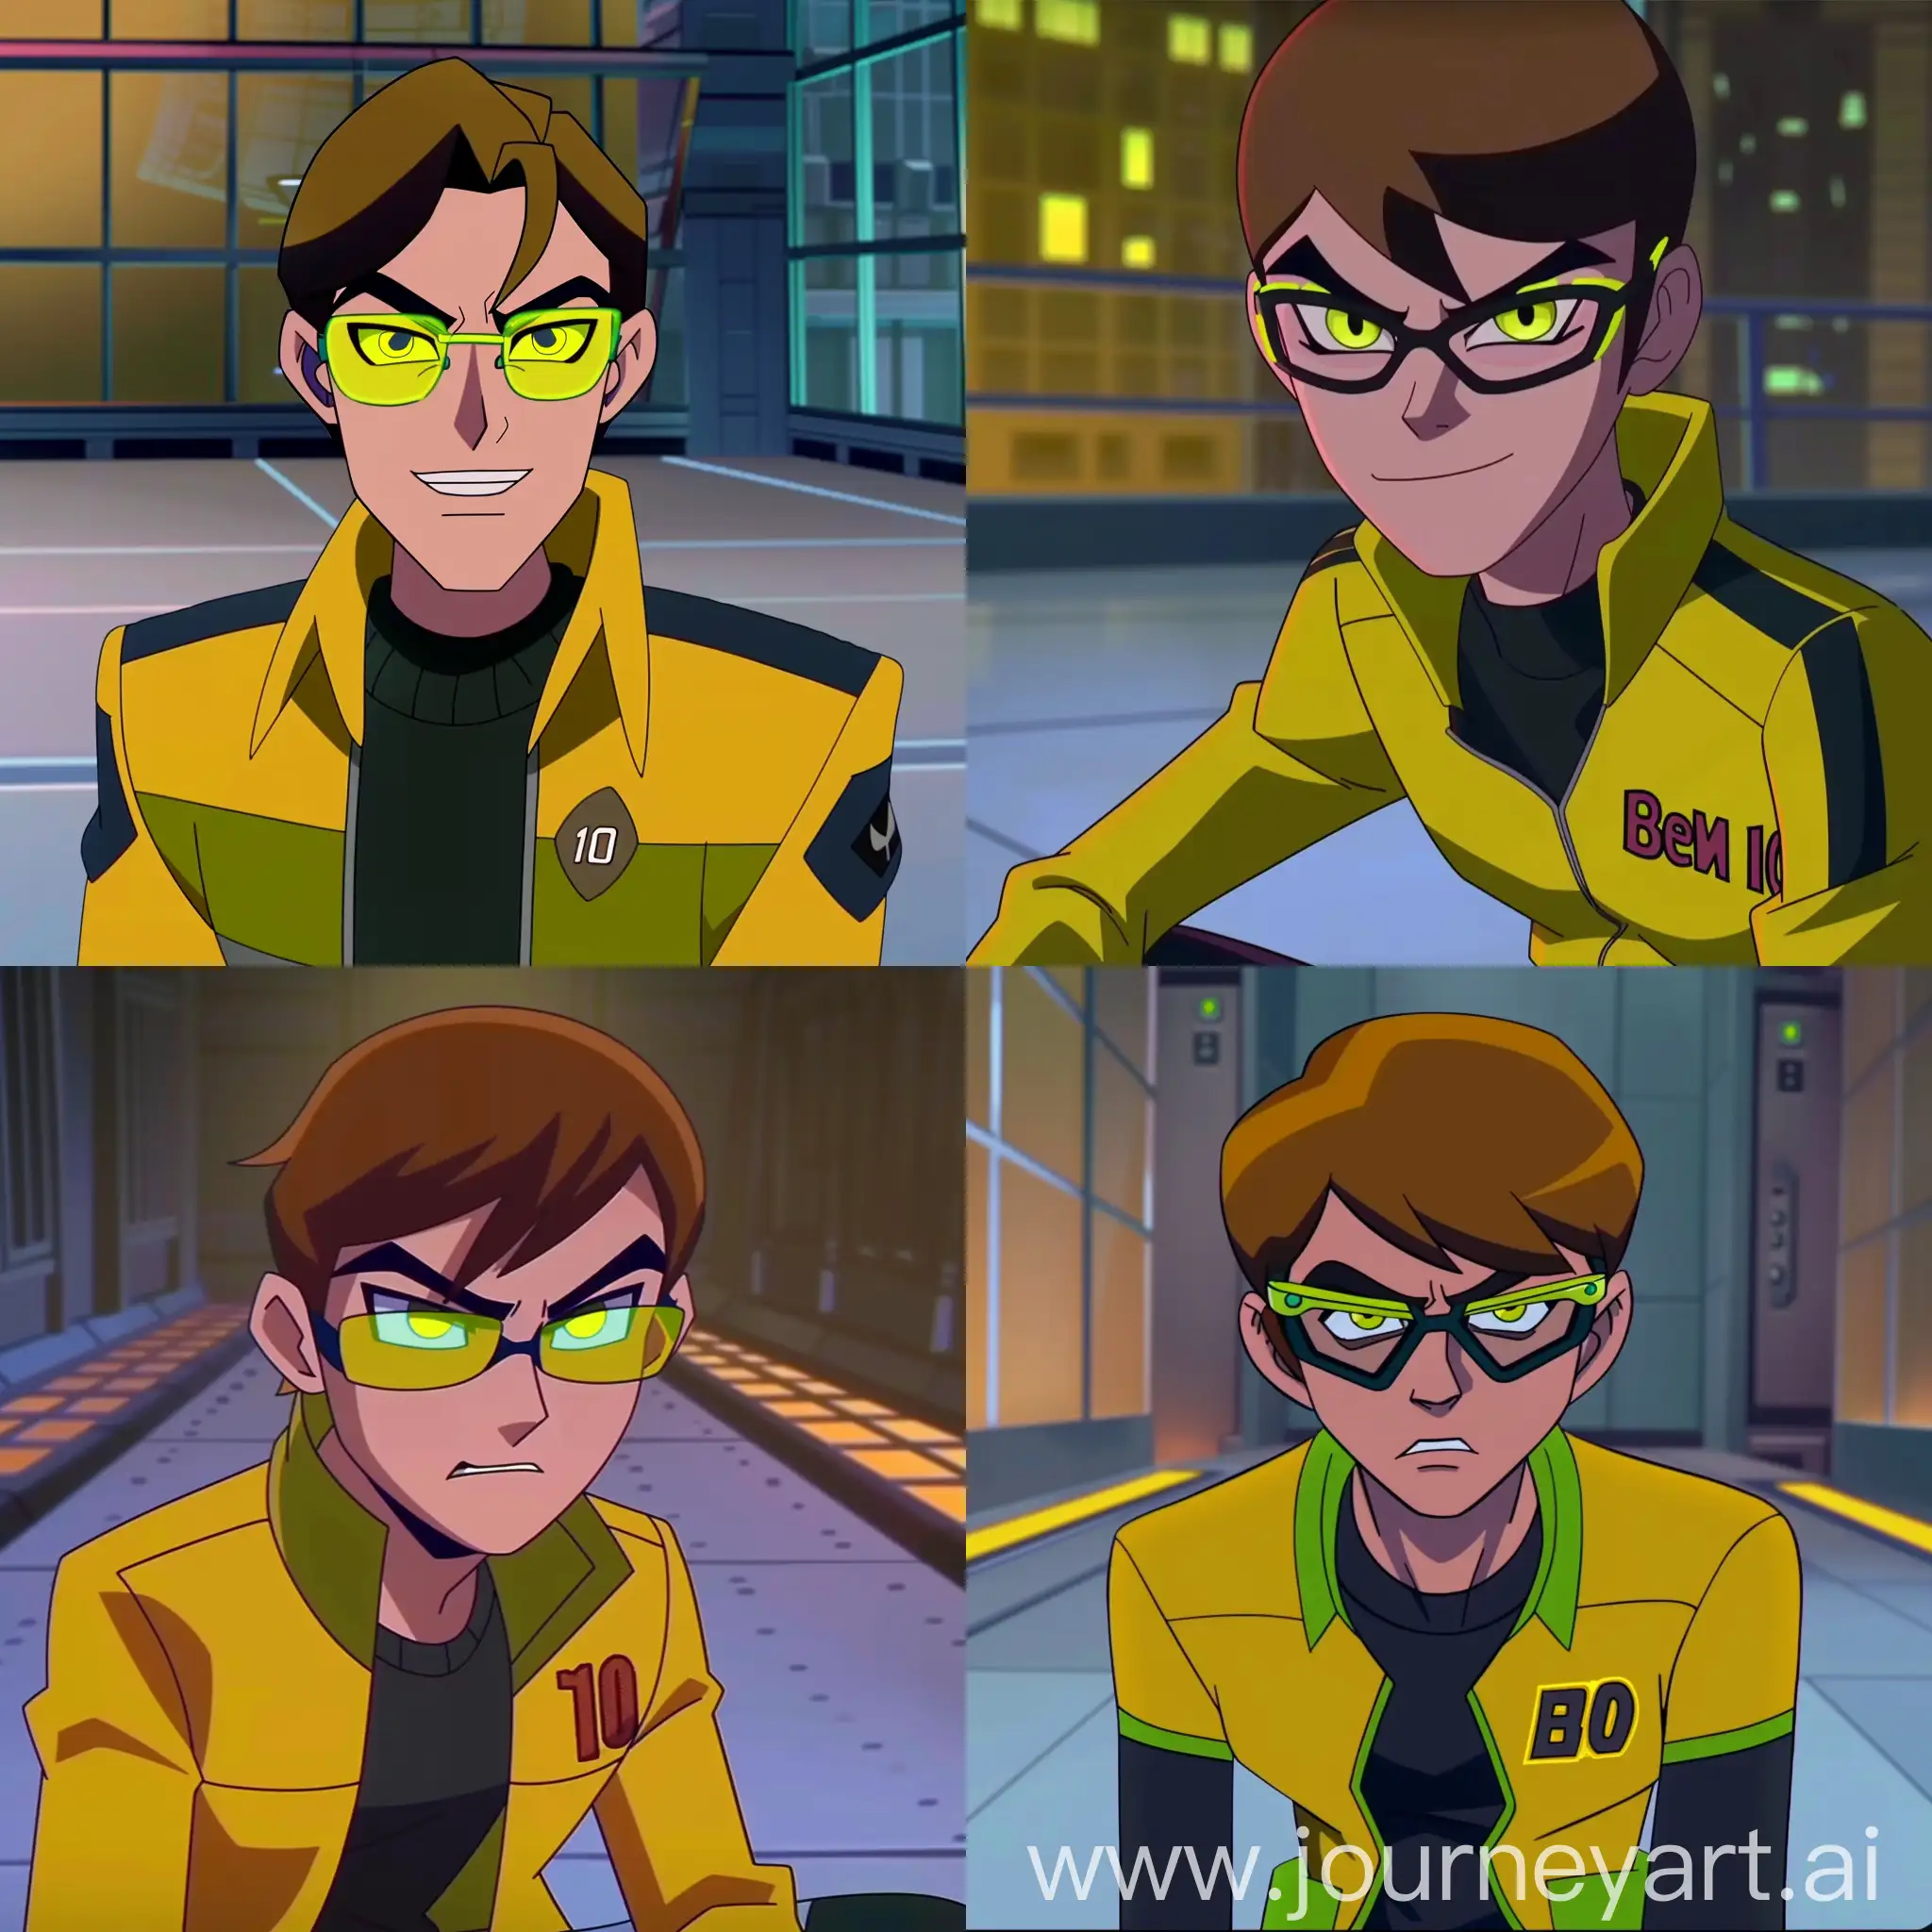 Smirking-Ben-10-Character-Portrait-with-Party-Glasses-and-Yellow-Jacket